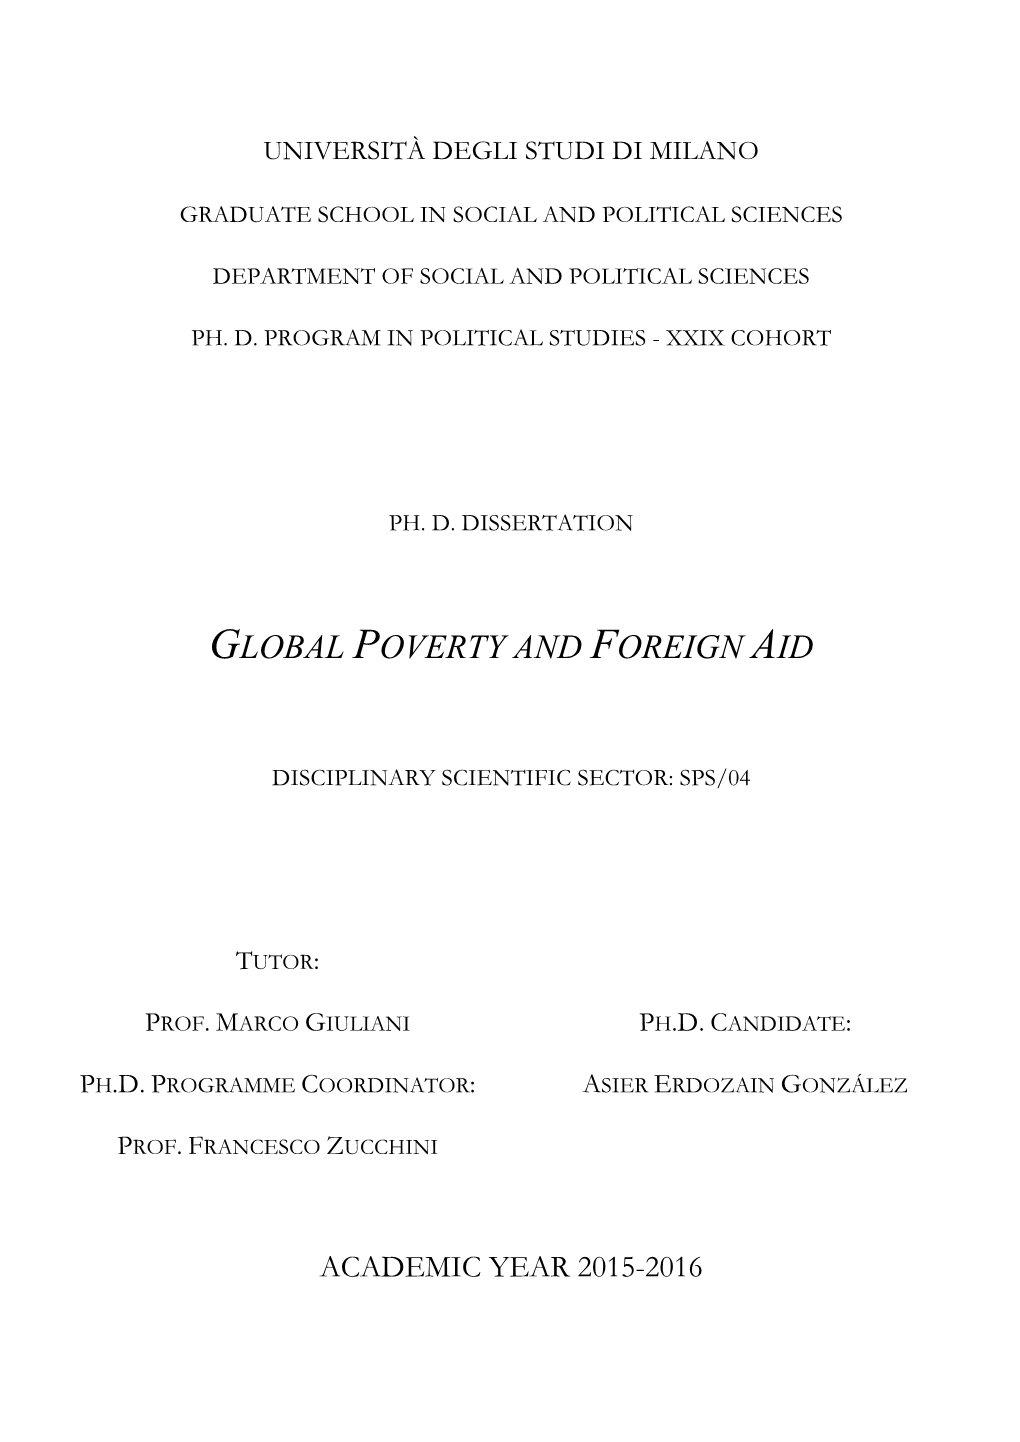 Global Poverty and Foreign Aid